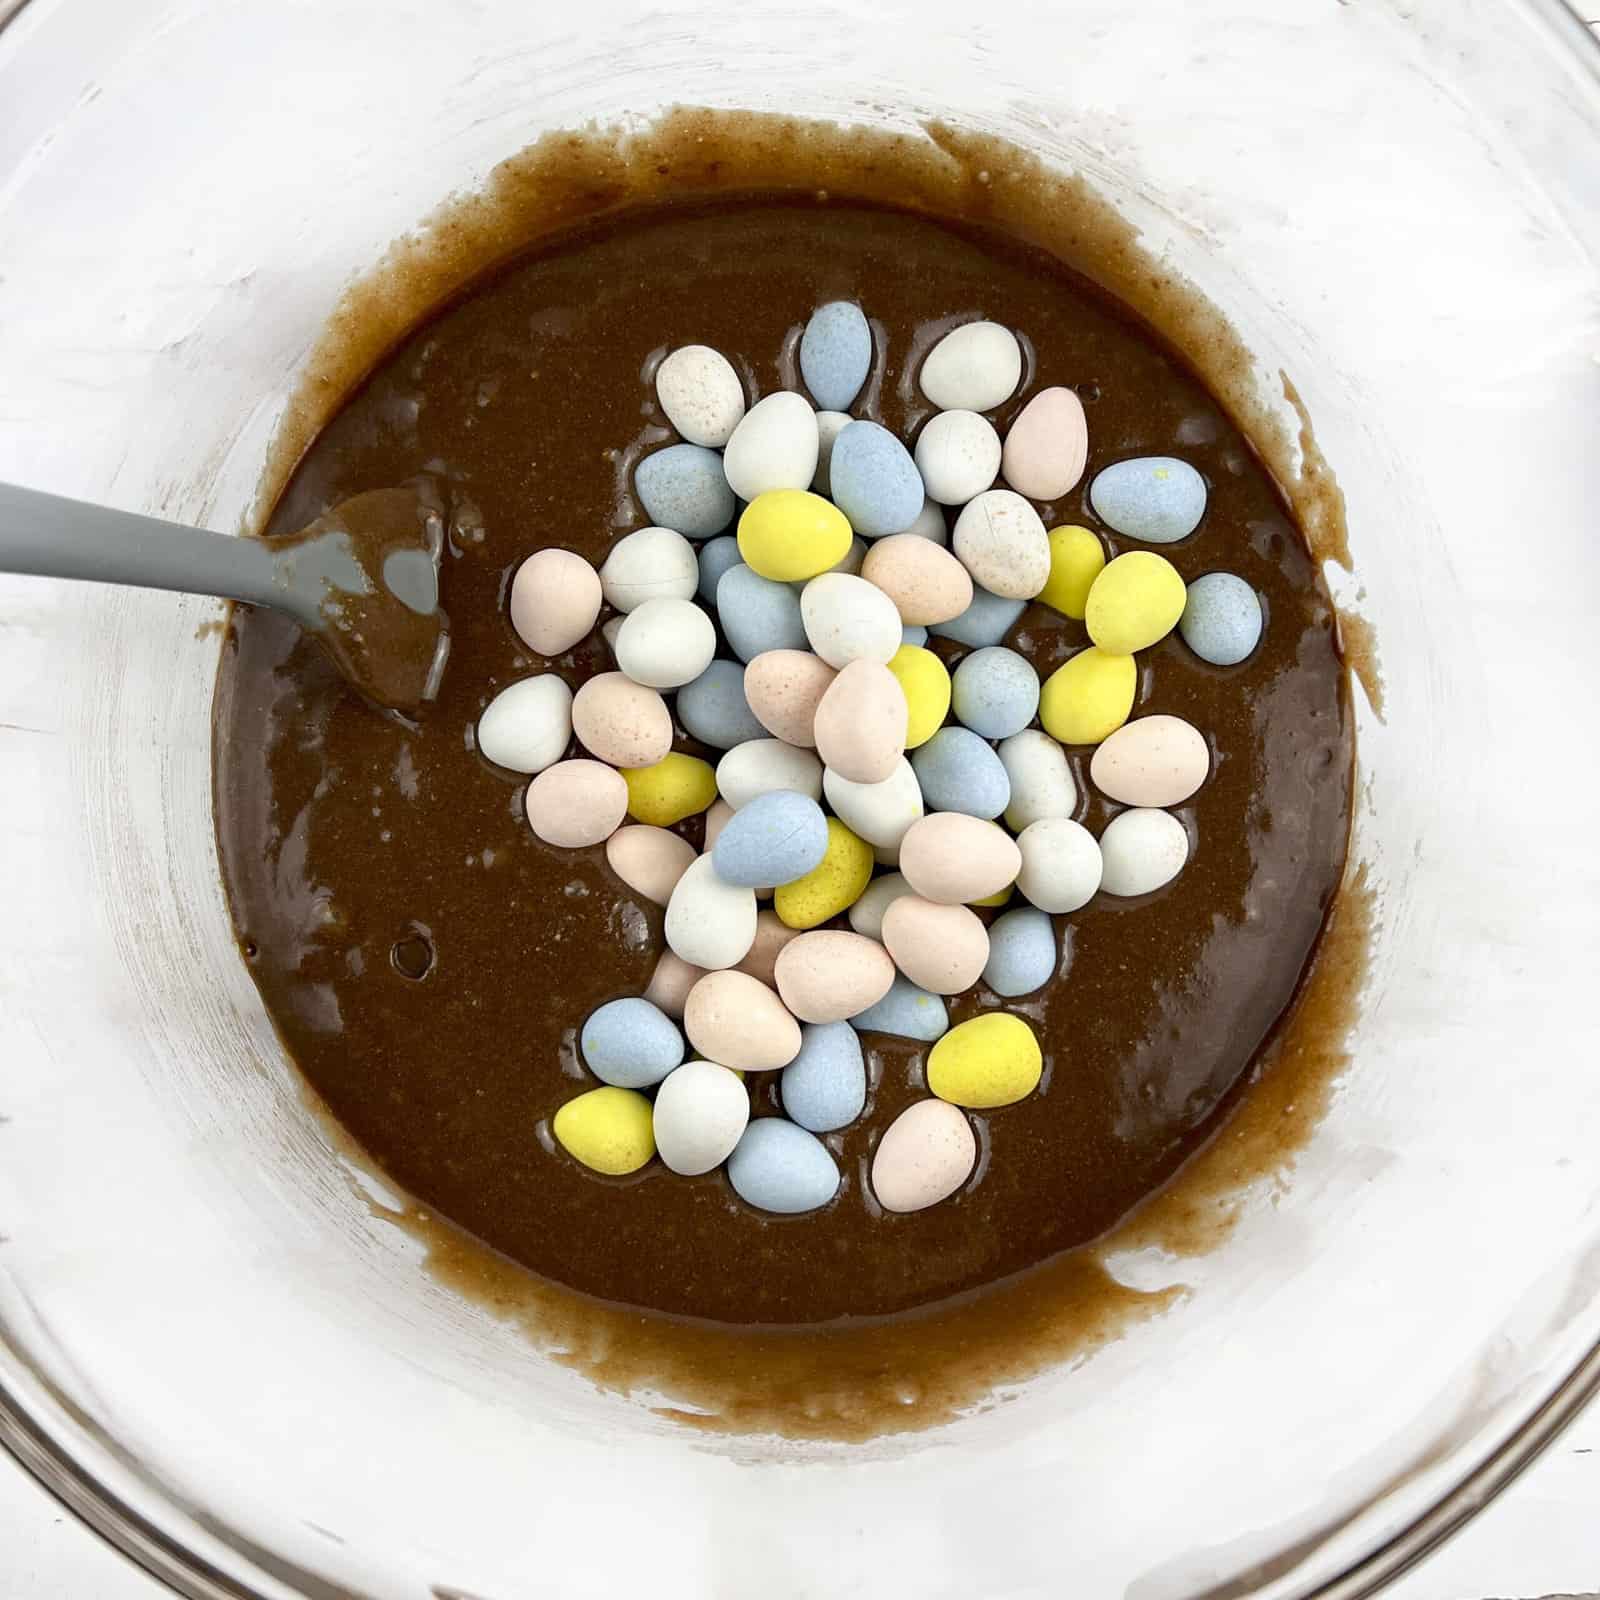 Brownie batter with chocolate mini eggs added.